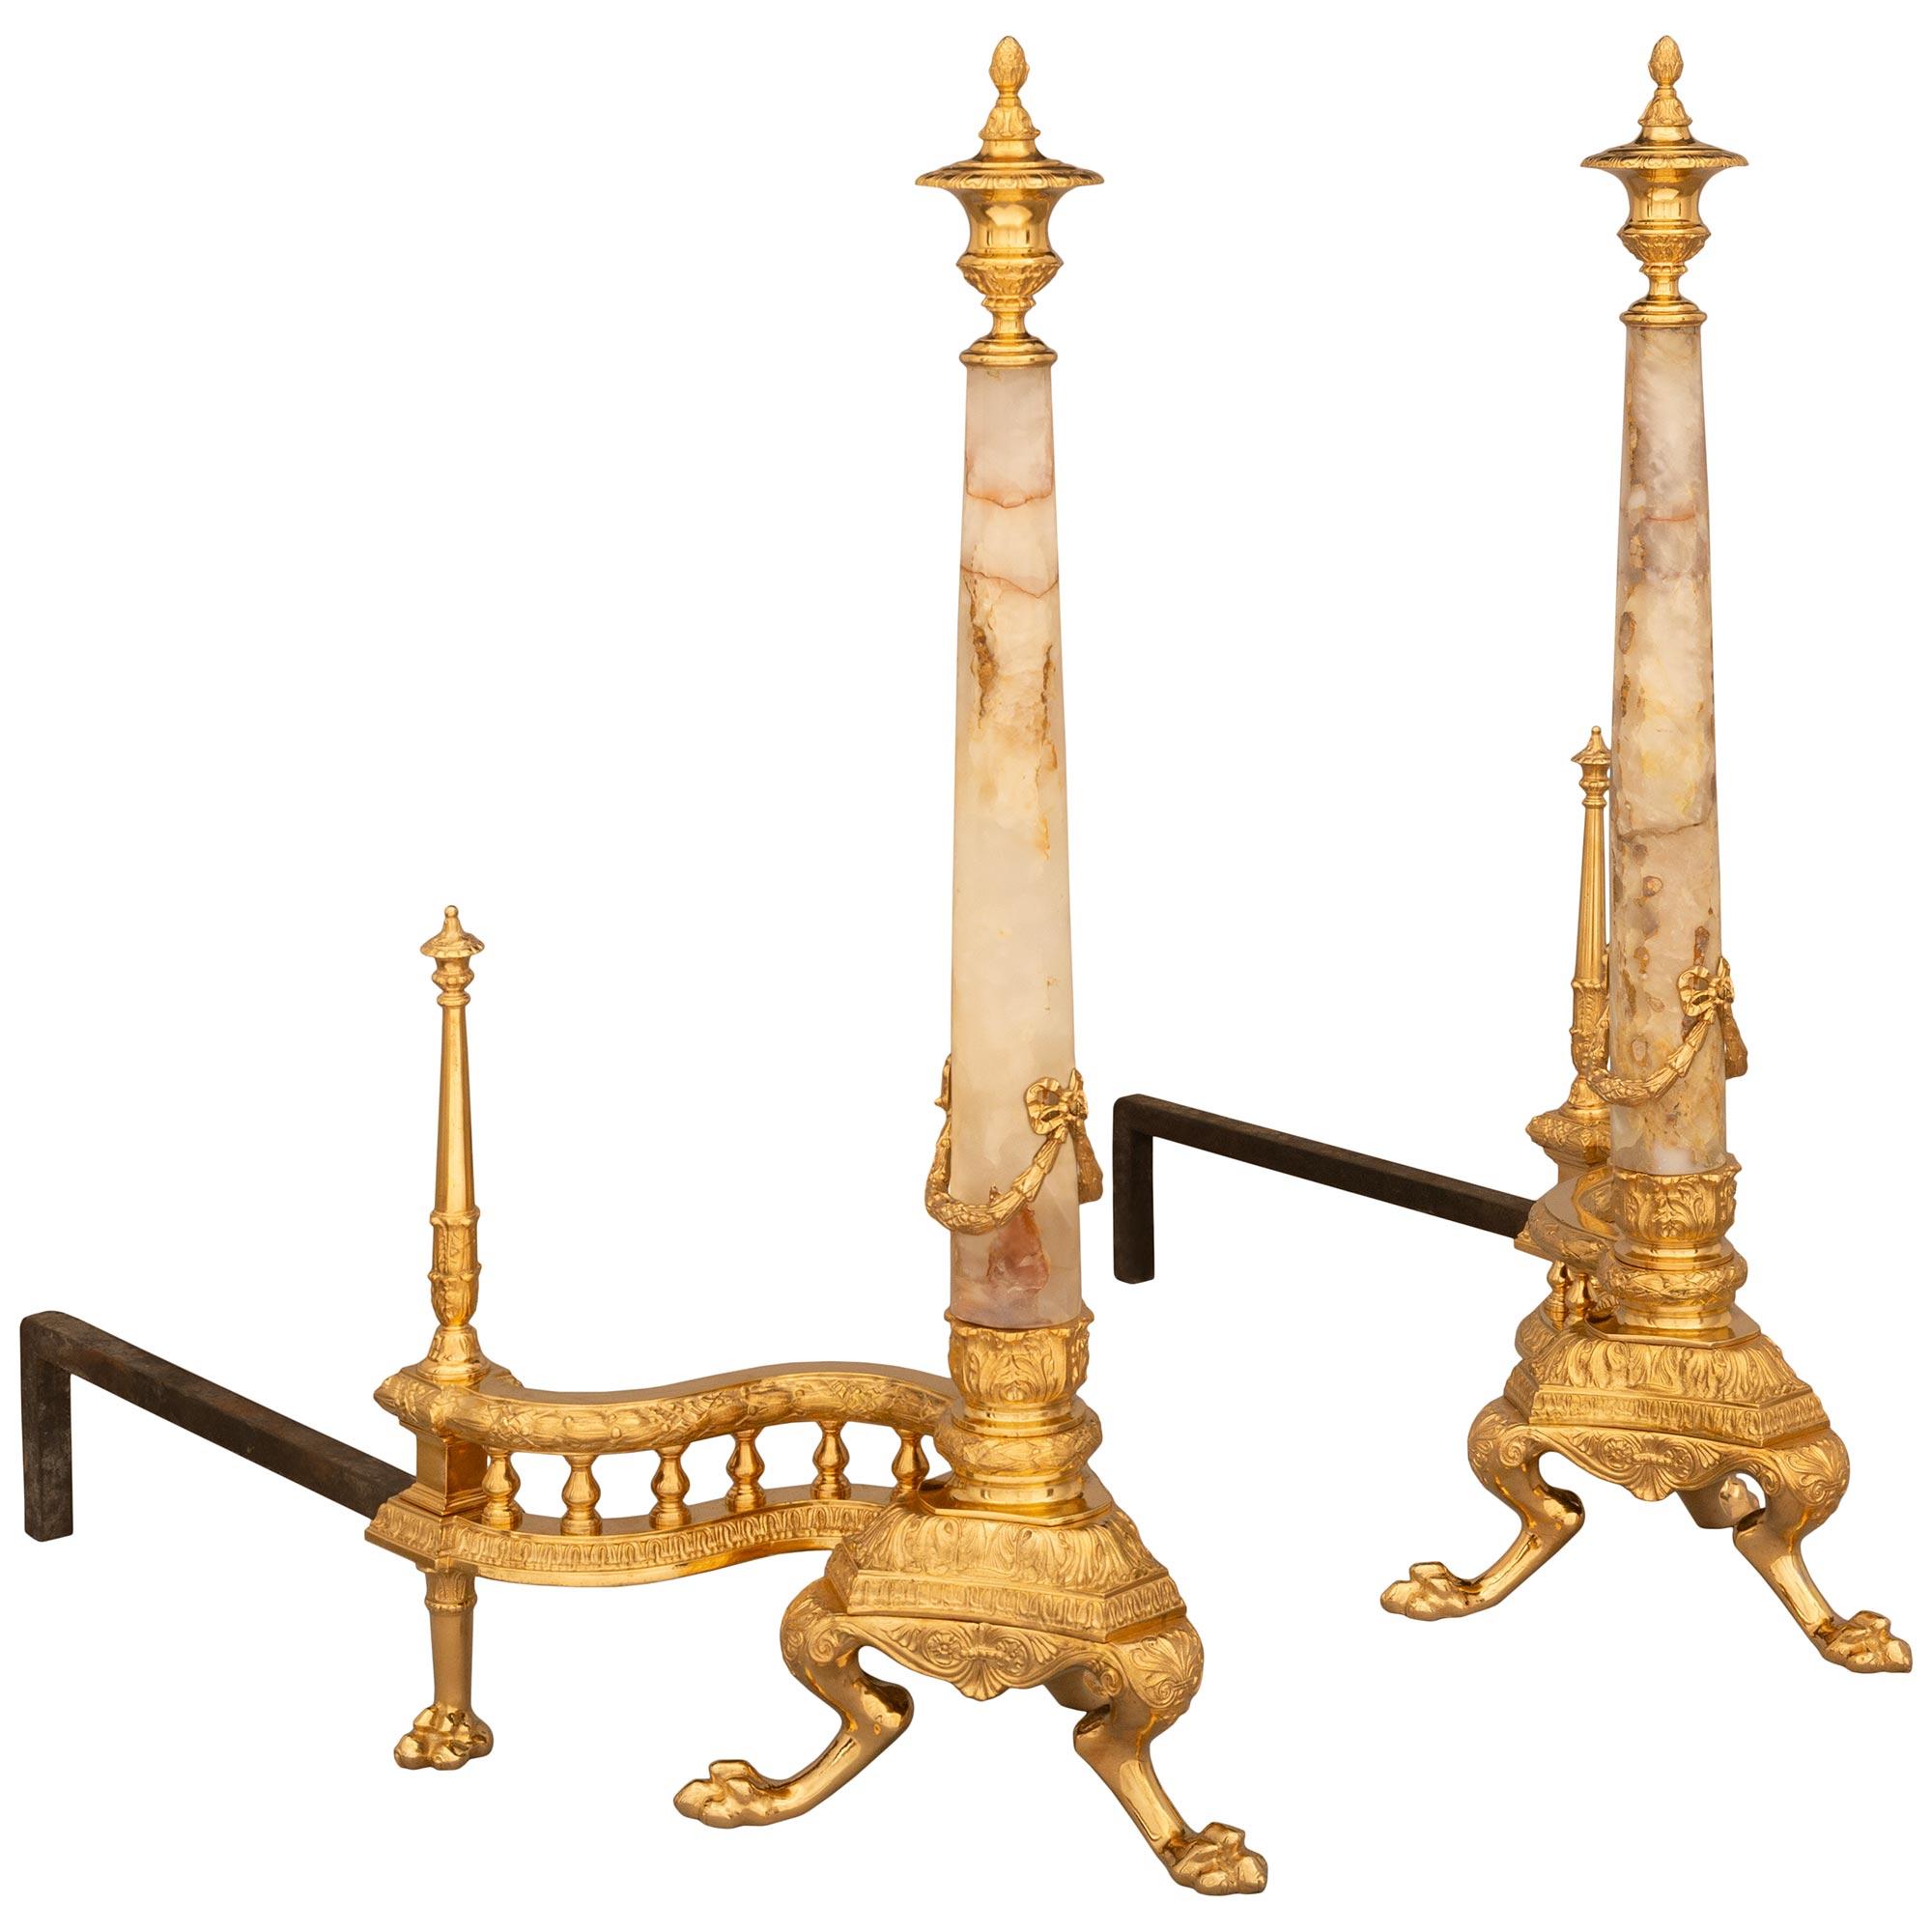 A handsome pair of French 19th century Louis Philippe period Ormolu, Onyx and Wrought Iron andirons. The pair are raised on tripod shaped bases with three pawed supports decorated by palmettes. The supports flank a scalloped shaped apron below the